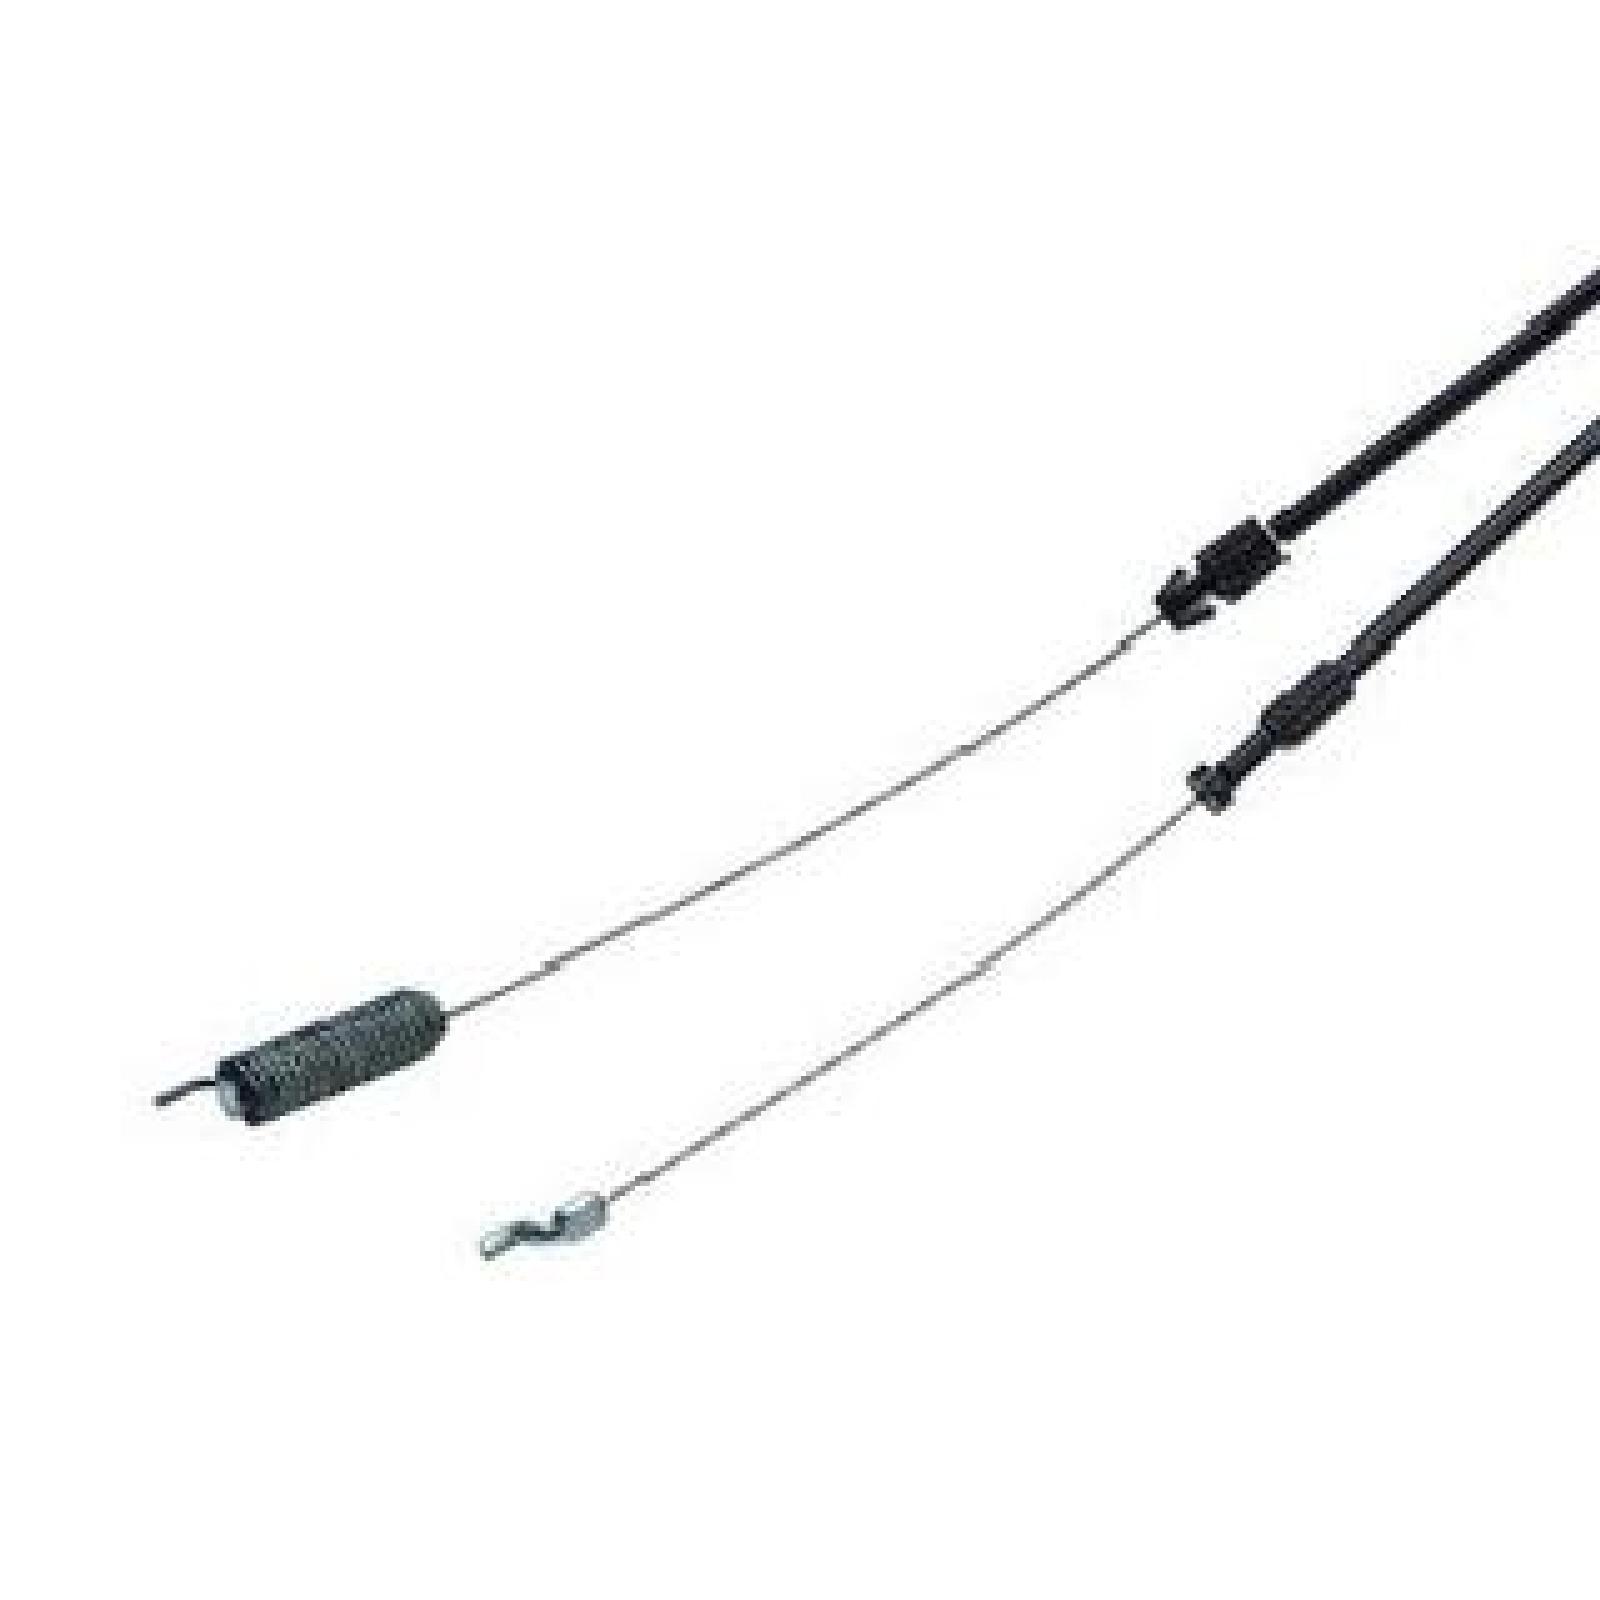 CONTROL CABLE, MTD 746 04 part# 46-043 by Oregon